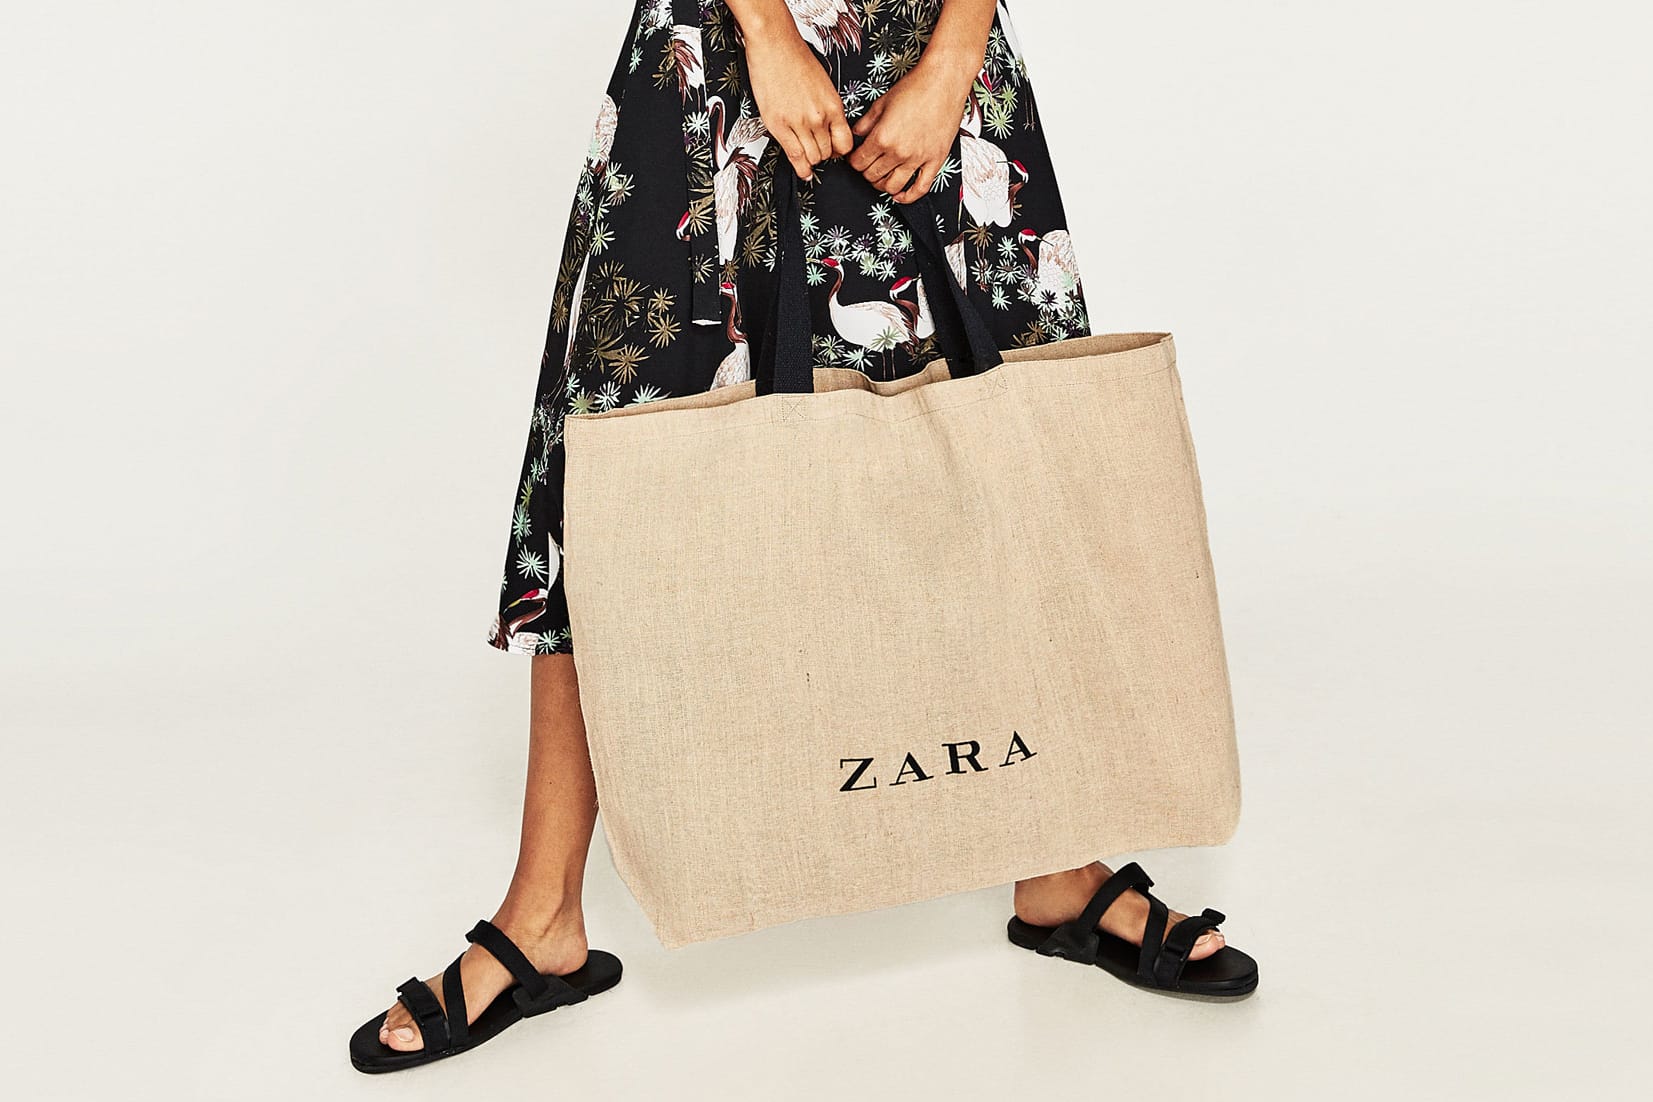 Zara Is Selling a Reusable Tote Bag 